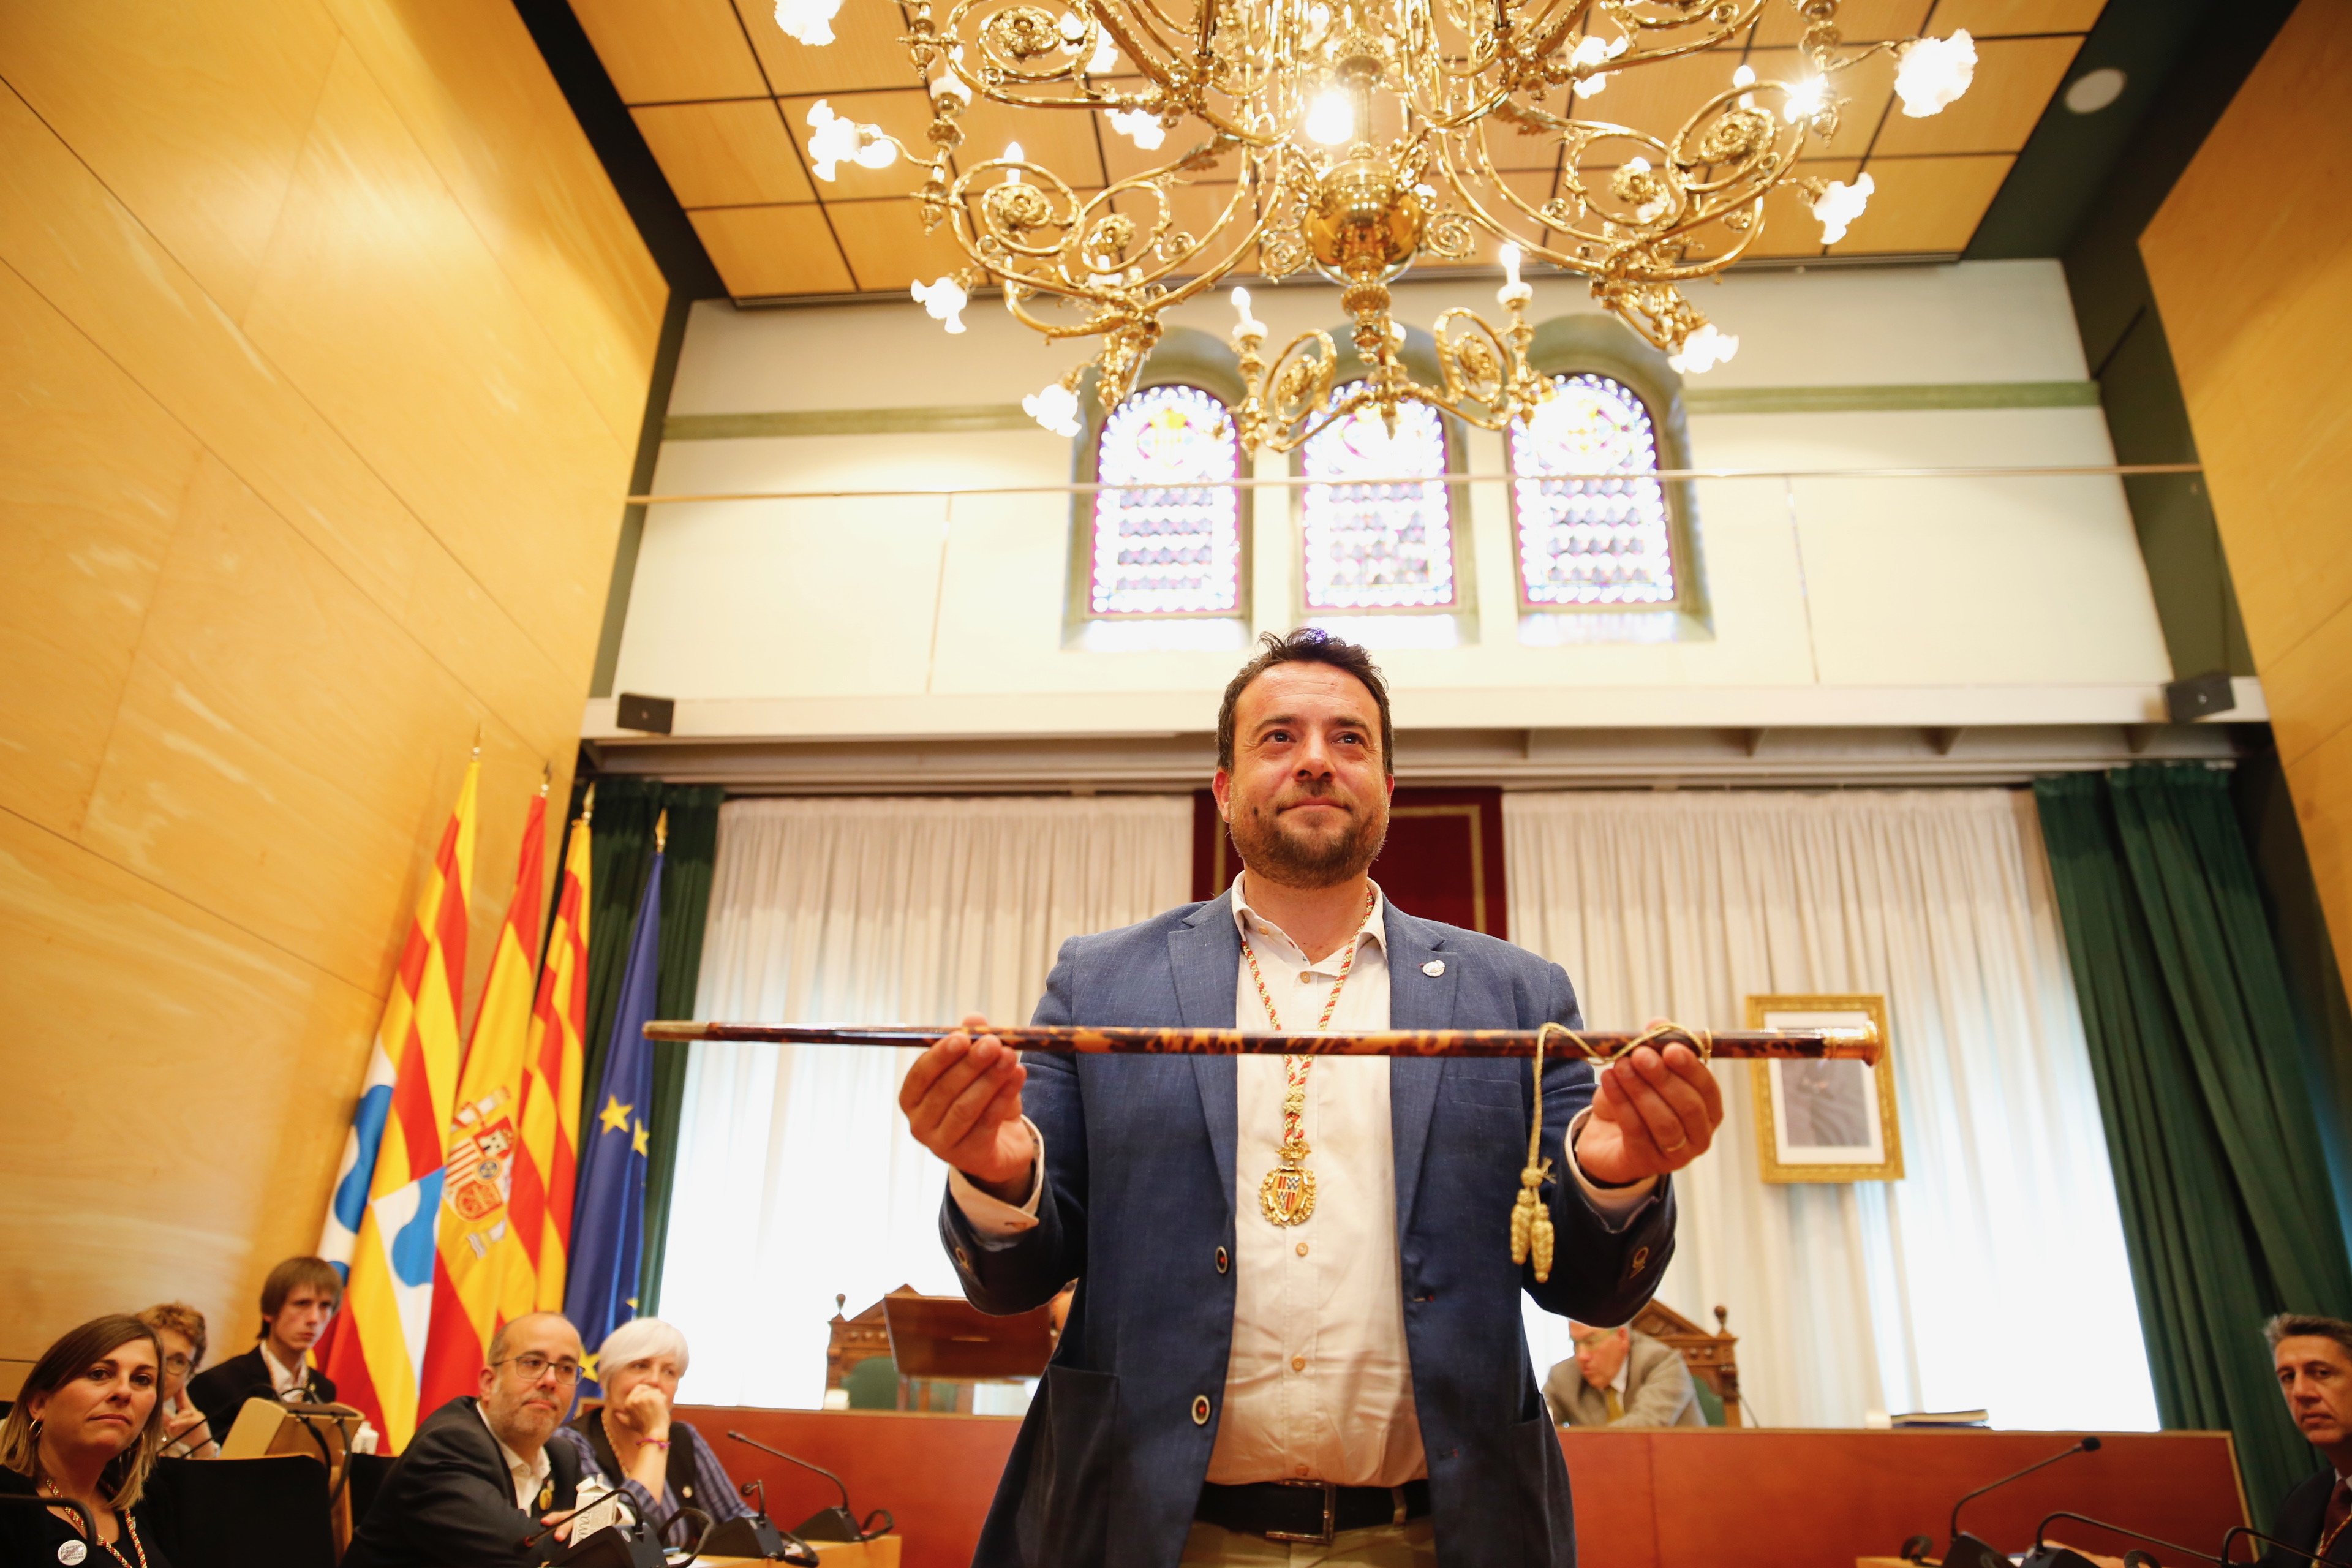 Socialist mayor of Catalan city arrested for driving drunk during lockdown